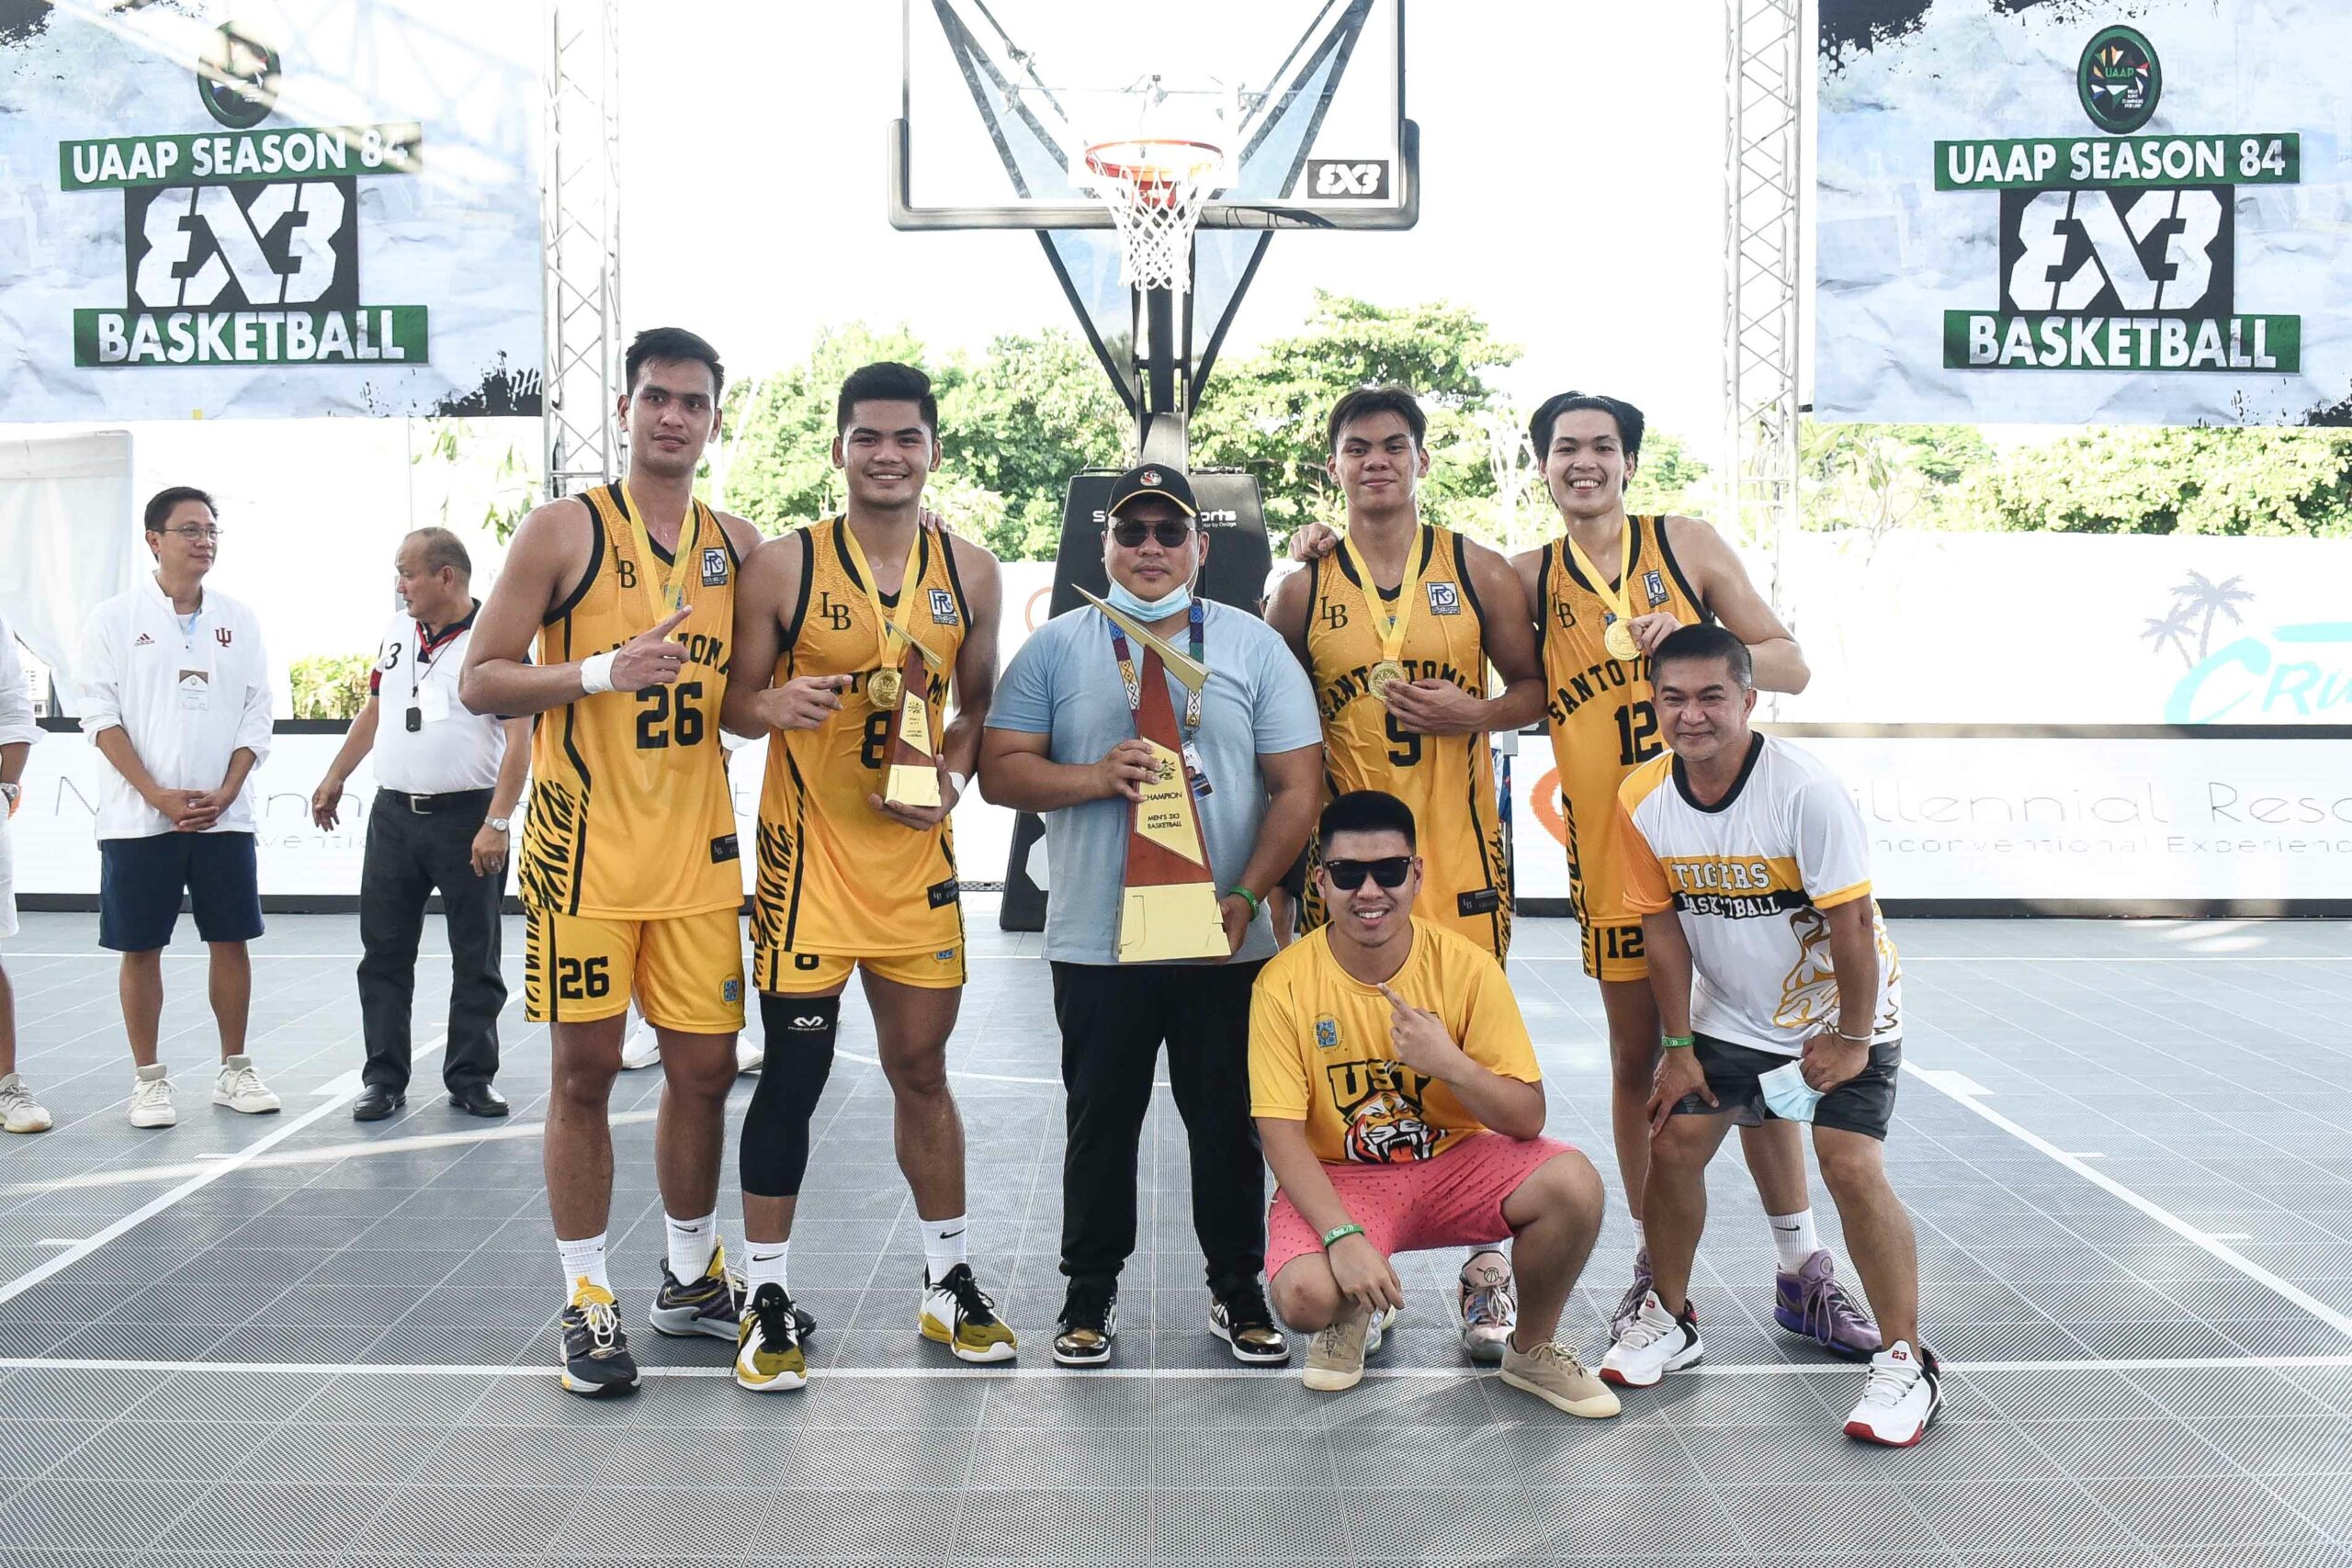 UAAP-Season-84-3x3-Mens-Champion-UST-3-scaled Manansala to handle UST Tiger Cubs as Growling Tigers to have 'new management' Basketball News UAAP UST  - philippine sports news